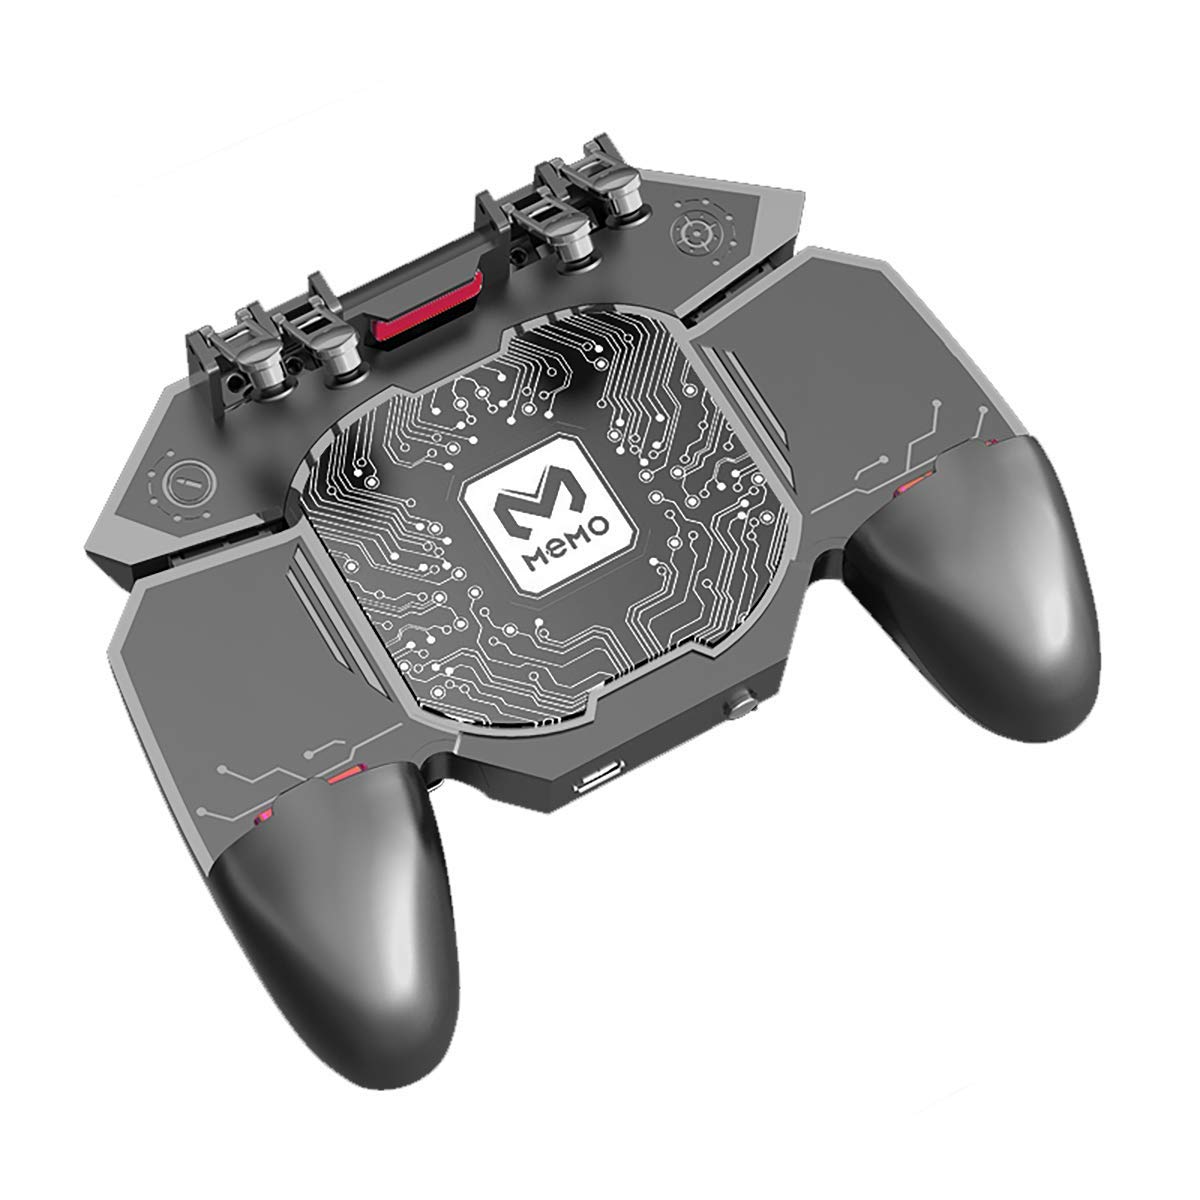 Mobile Phone Controller, Claw Controller, PUBG [...]